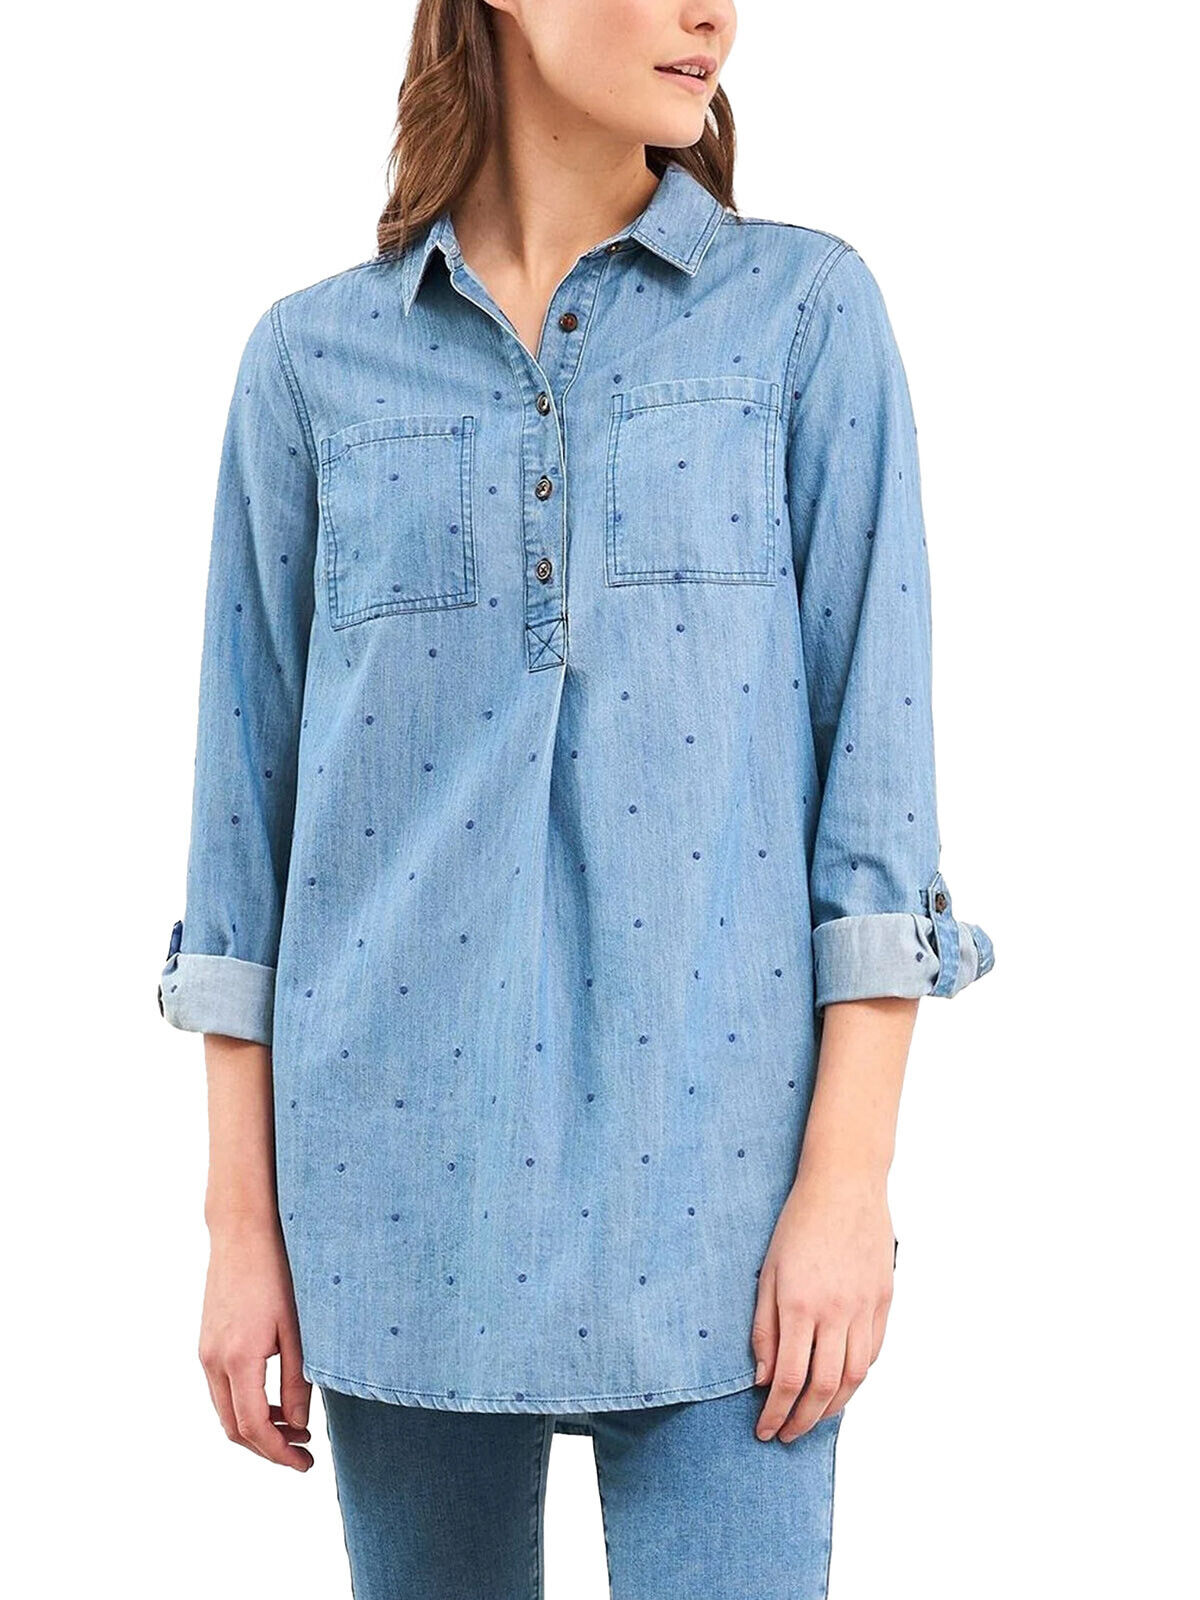 EX WHITE STUFF Mid-Denim Kinley Tunic in Size 8 or 12 RRP £55